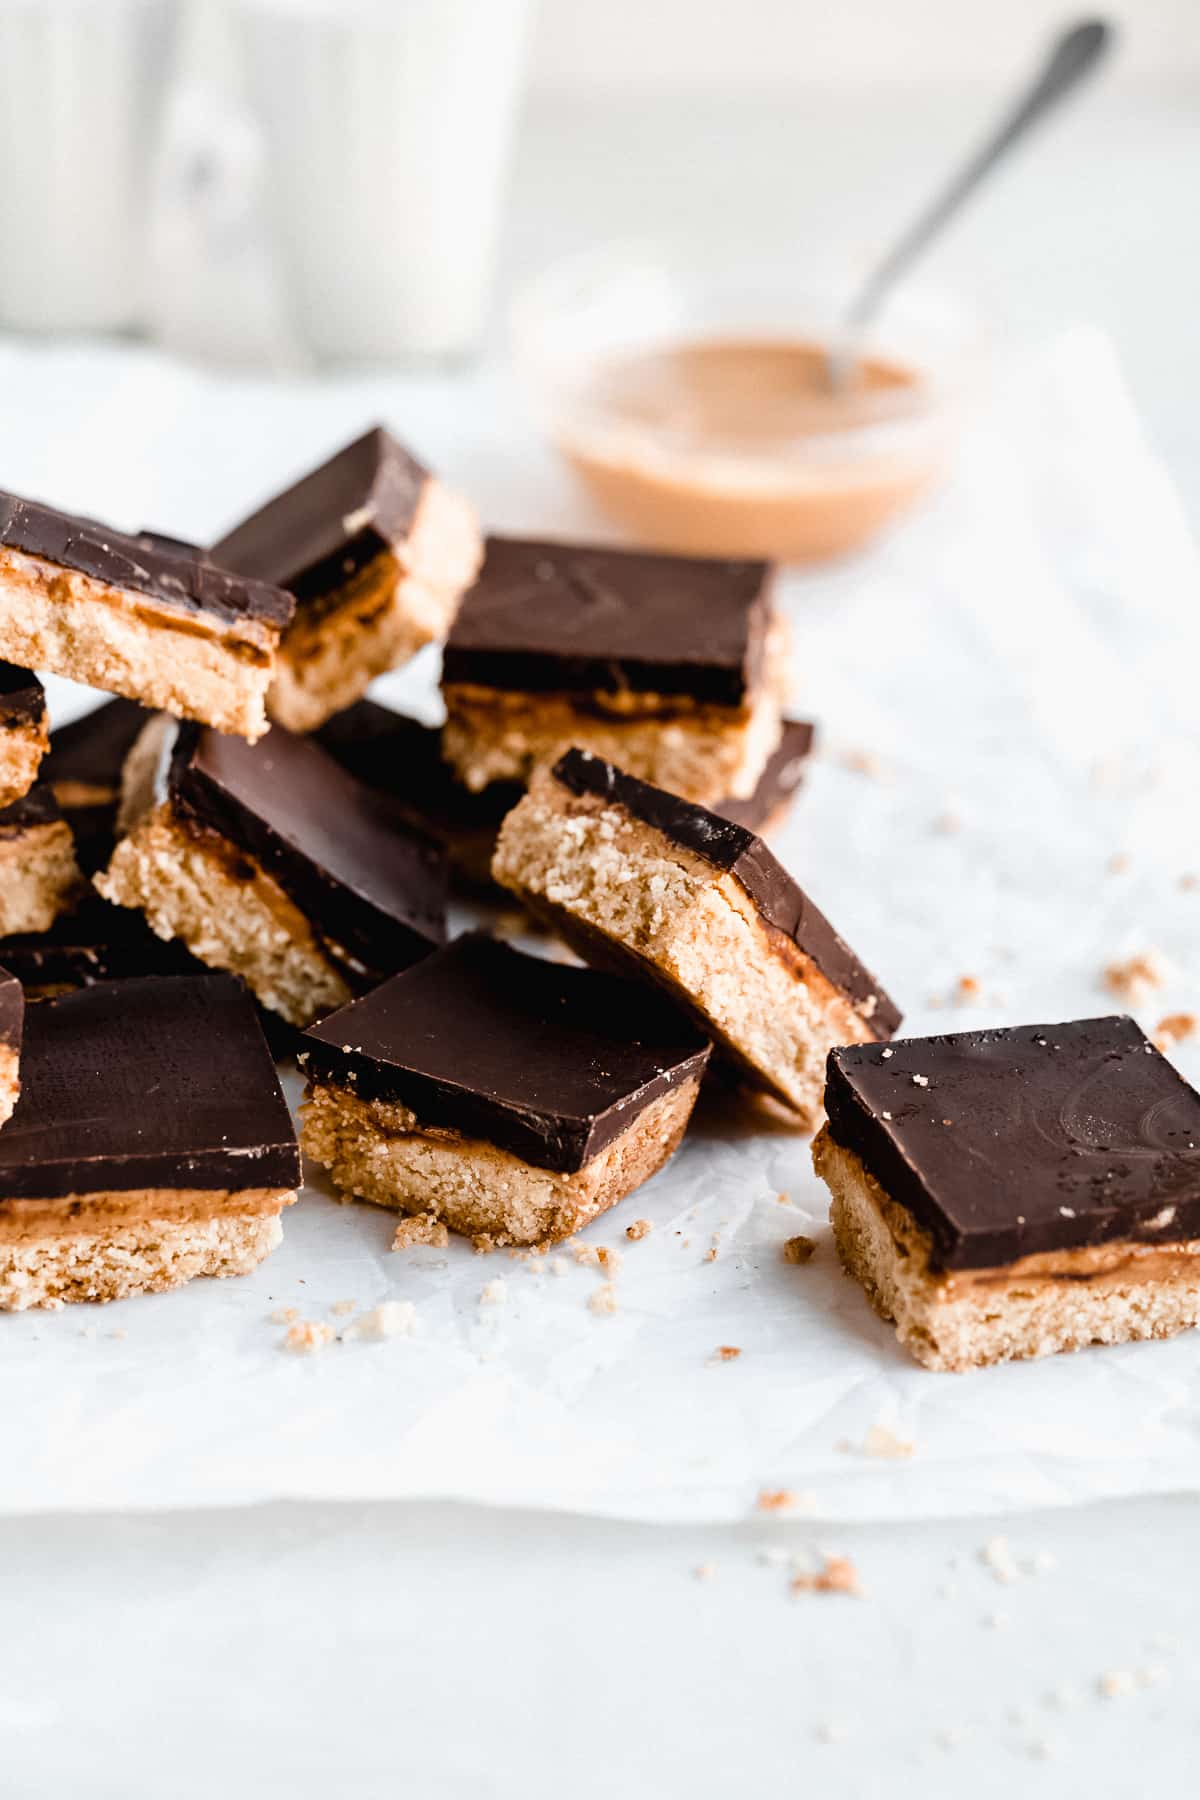 Side view image of several Tagalong Bars cut into squares and mounded on top of one another on parchment paper on a white marble slab.  A small bowl of peanut butter is in the background.  